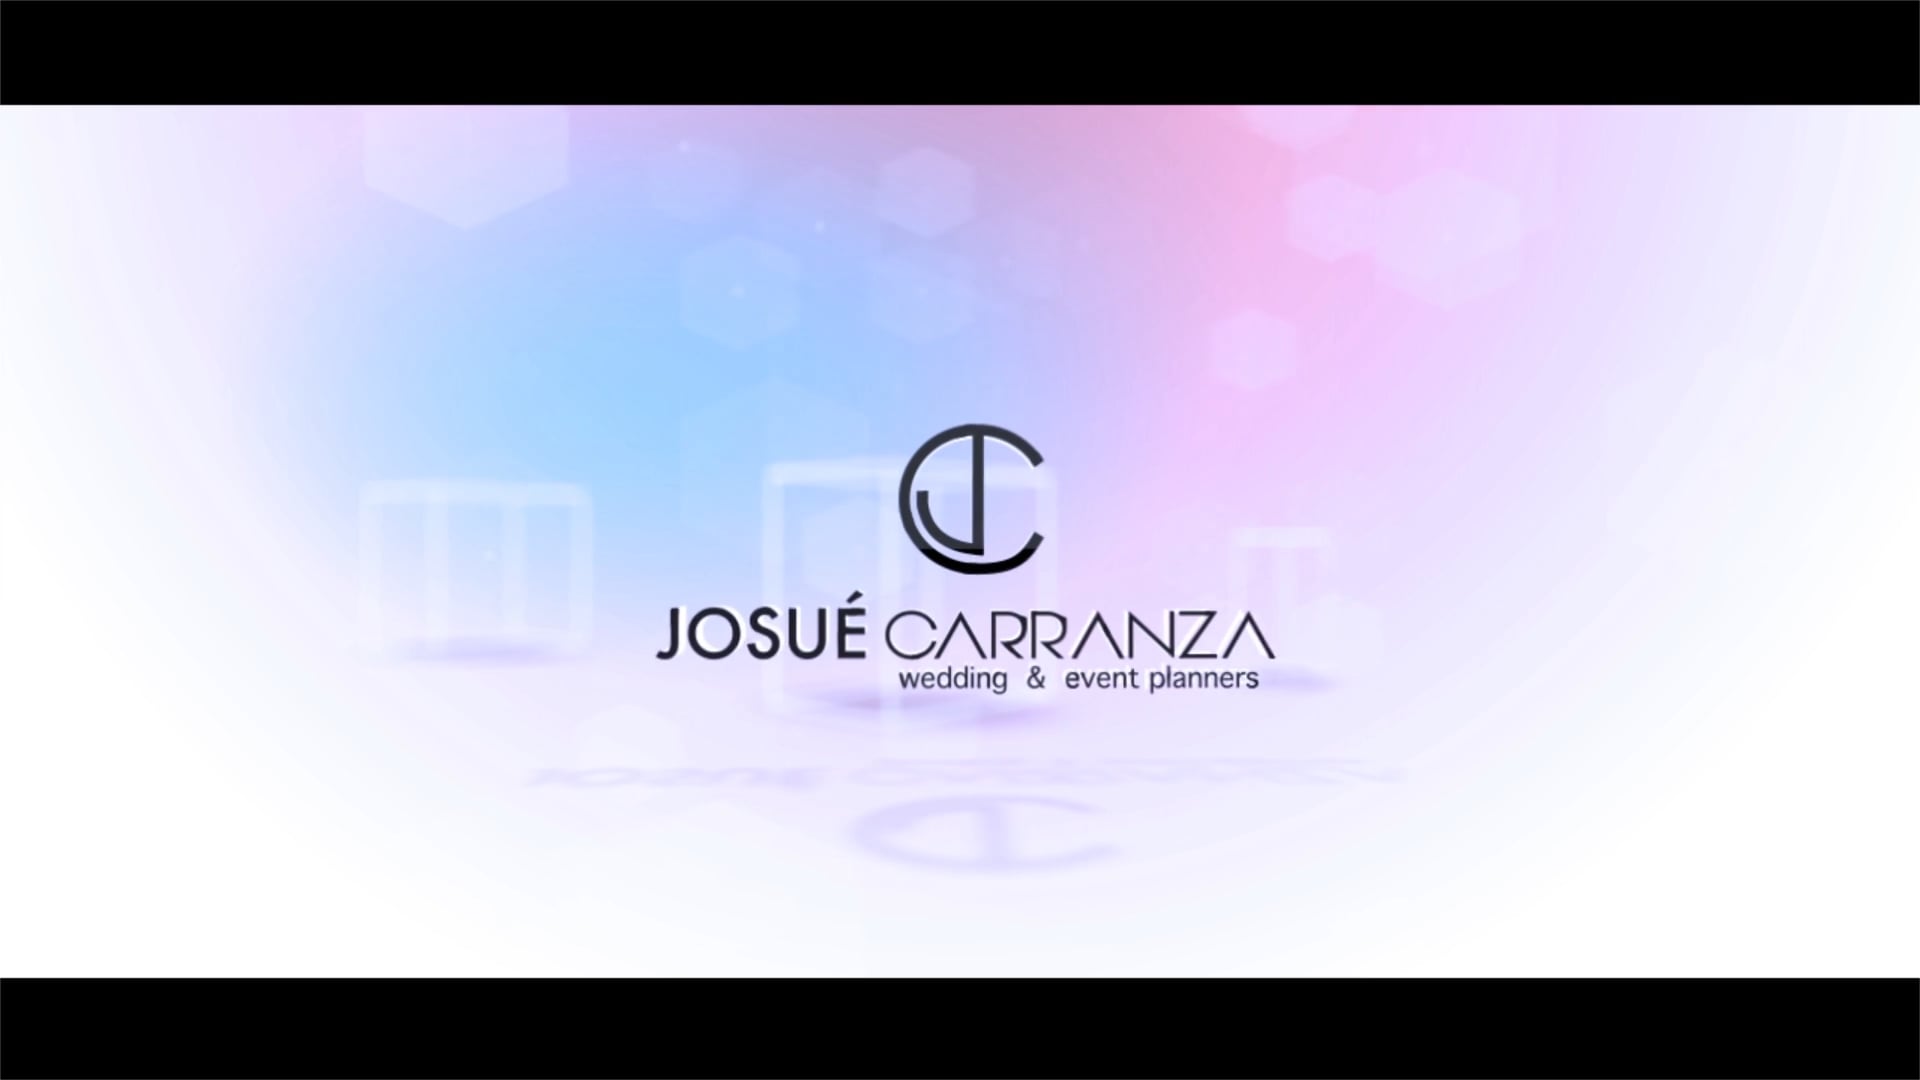 Josué Carranza Wedding and Event Planners